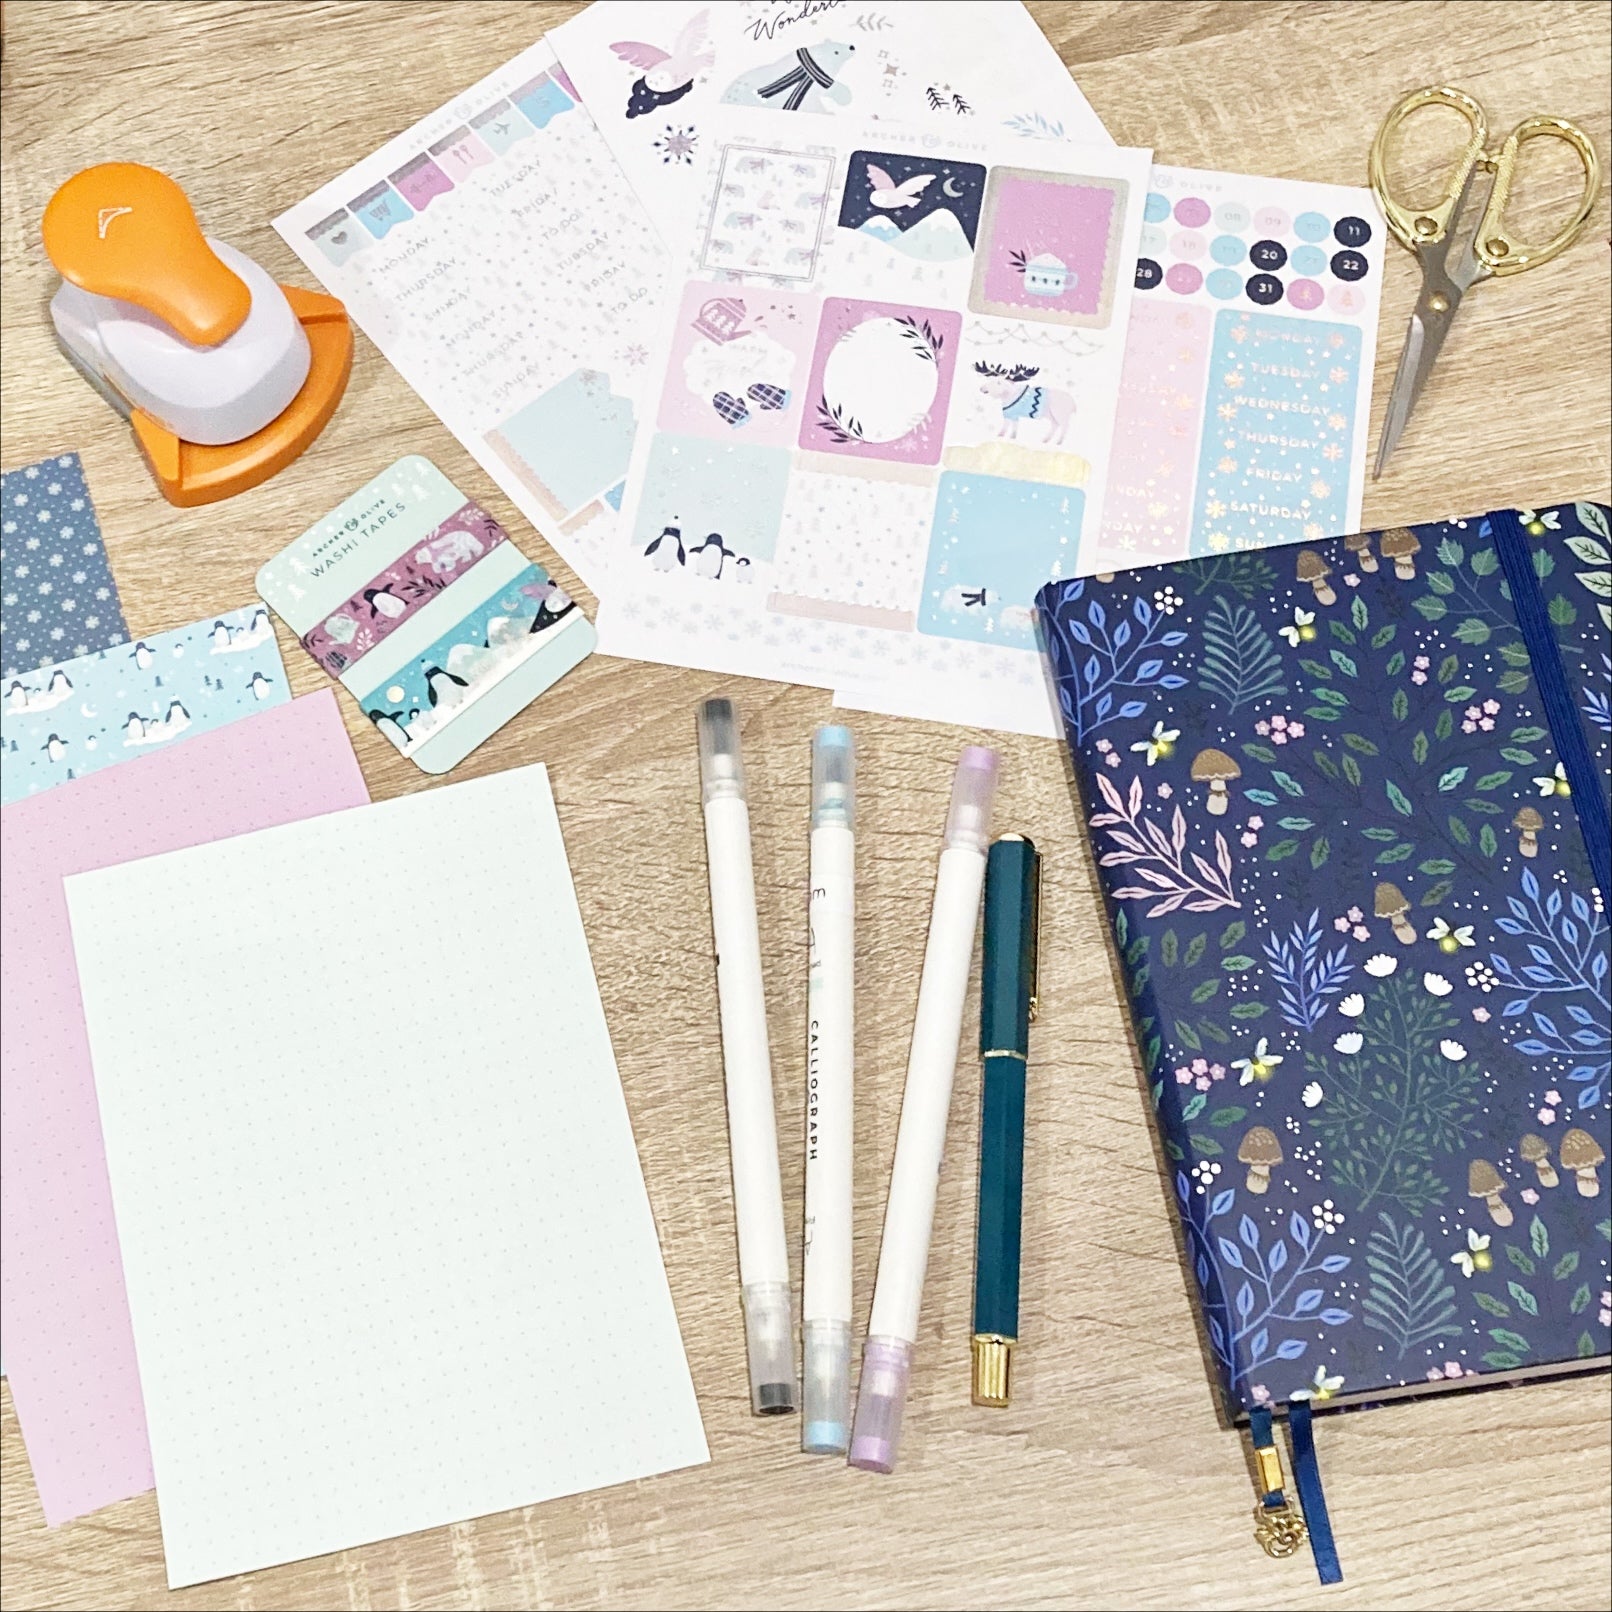 Paper, calliographs, stickers, washi, scissors, and a notebook